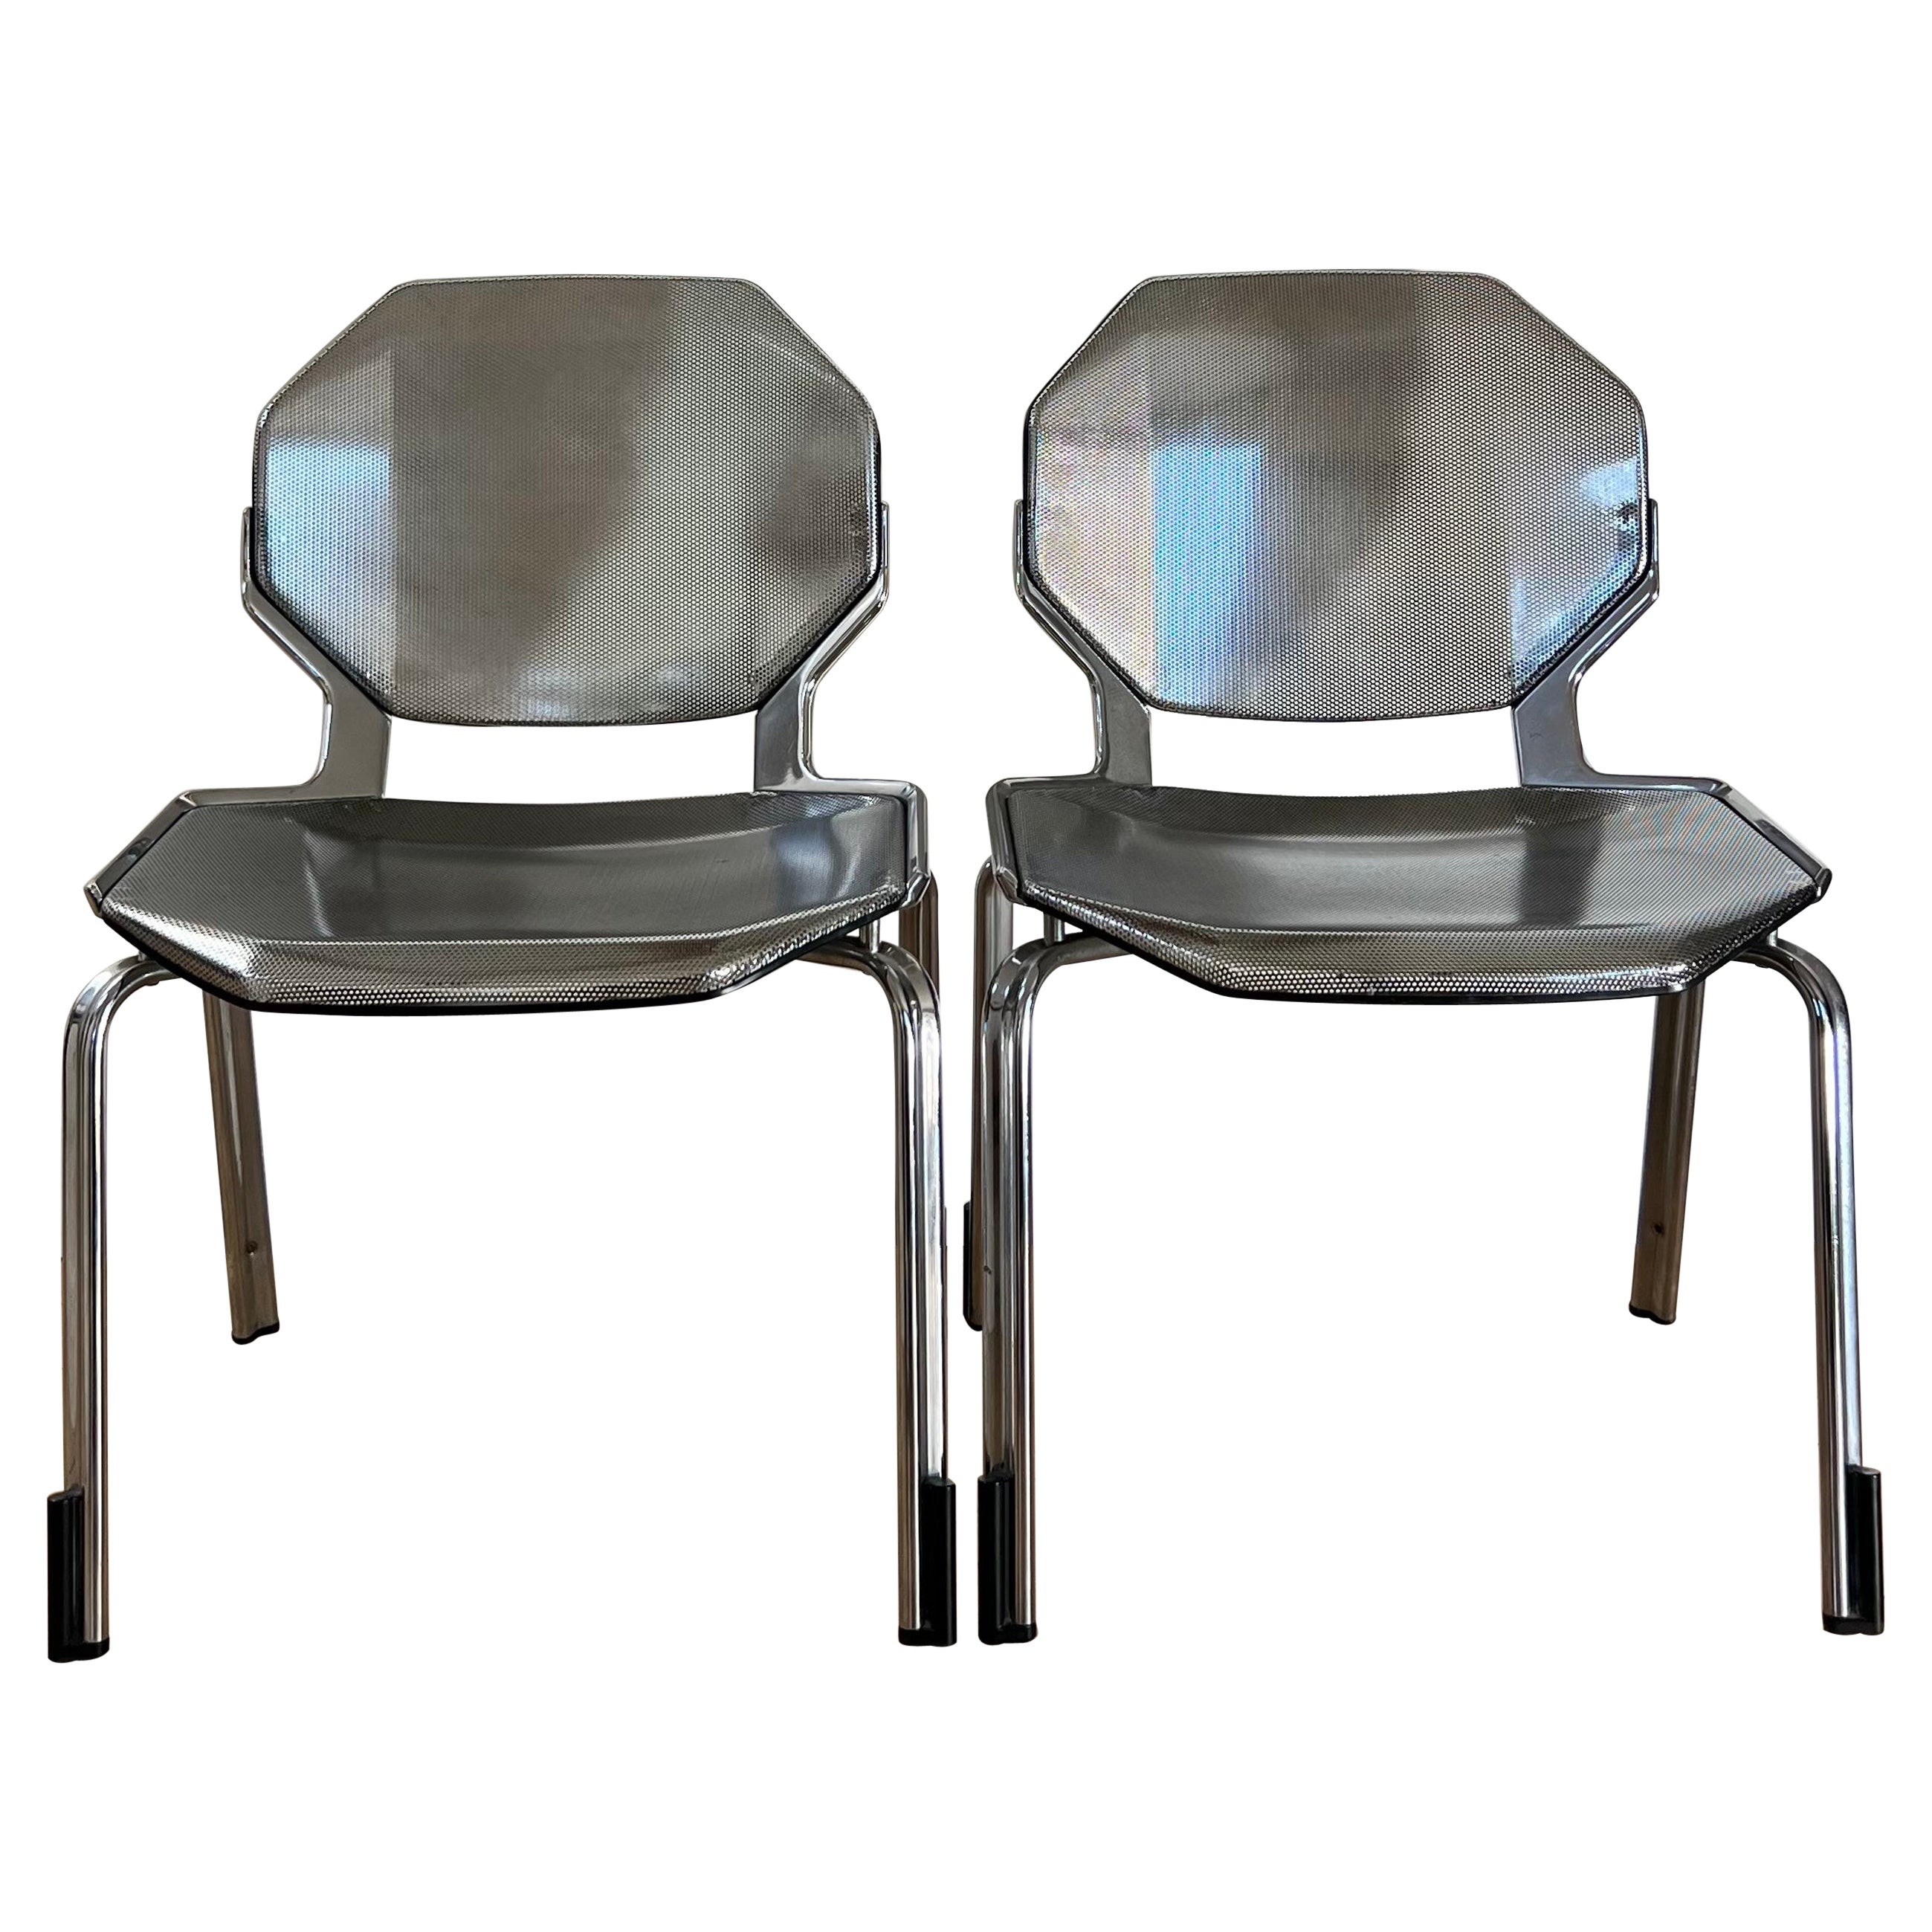 Pair of Space-Age Metal Chairs After Fröscher, 1970s